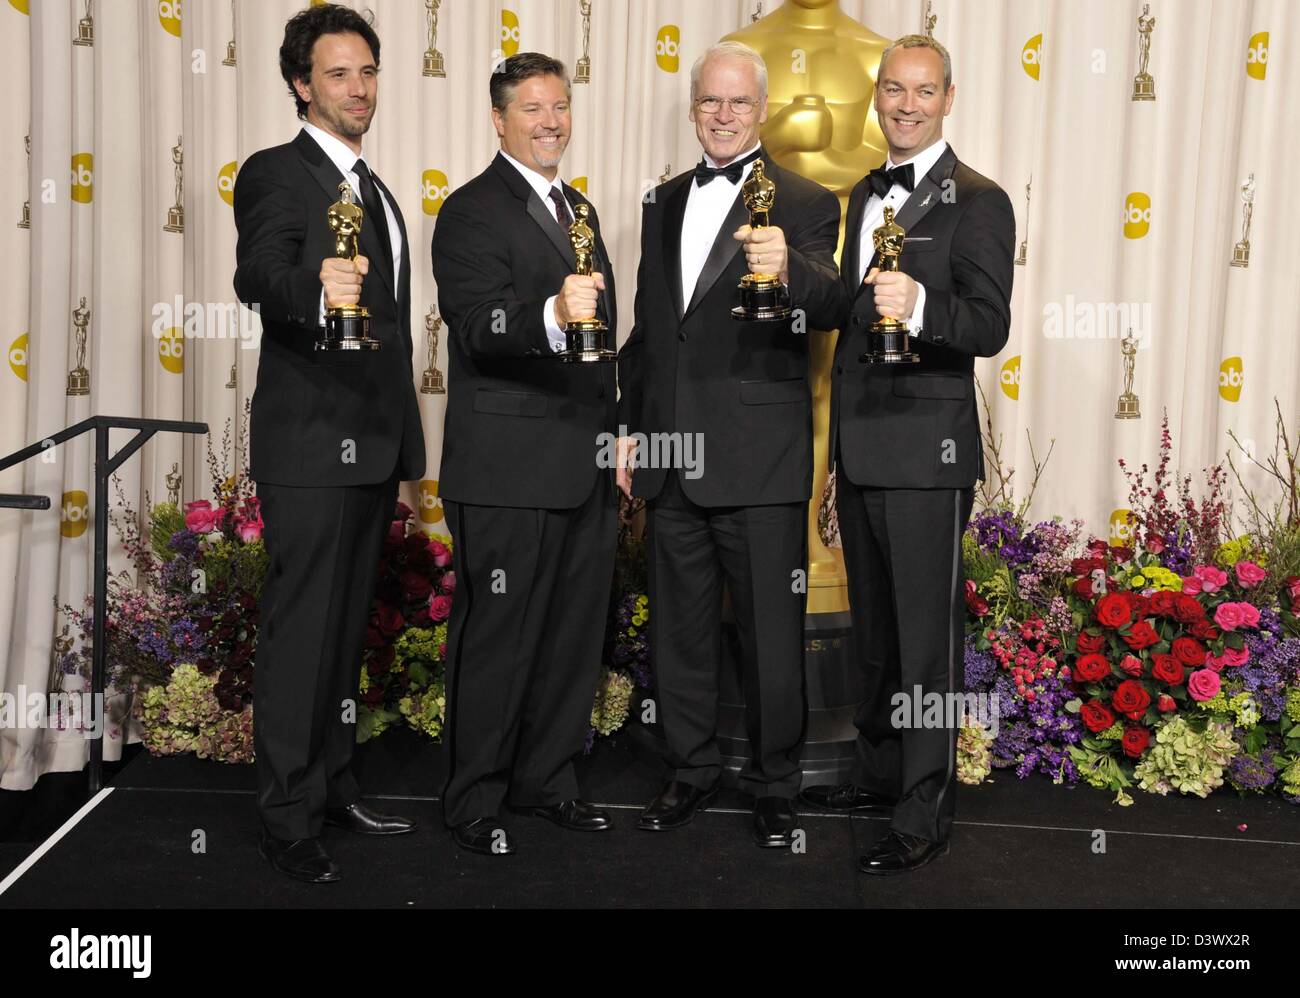 Los Angeles, California, U.S. 24th Feb, 2013. Bill Westenhofer, Guillaume Rocherson, Erik-Jan DeBoer, Donald R. Elliot in the press room for The 85th Annual Academy Awards Oscars 2013 - PRESS ROOM, The Dolby Theatre at Hollywood & Highland Centre, Los Angeles, CA February 24, 2013. Photo By: Dee Cercone/Everett Collection/Alamy Live News Stock Photo